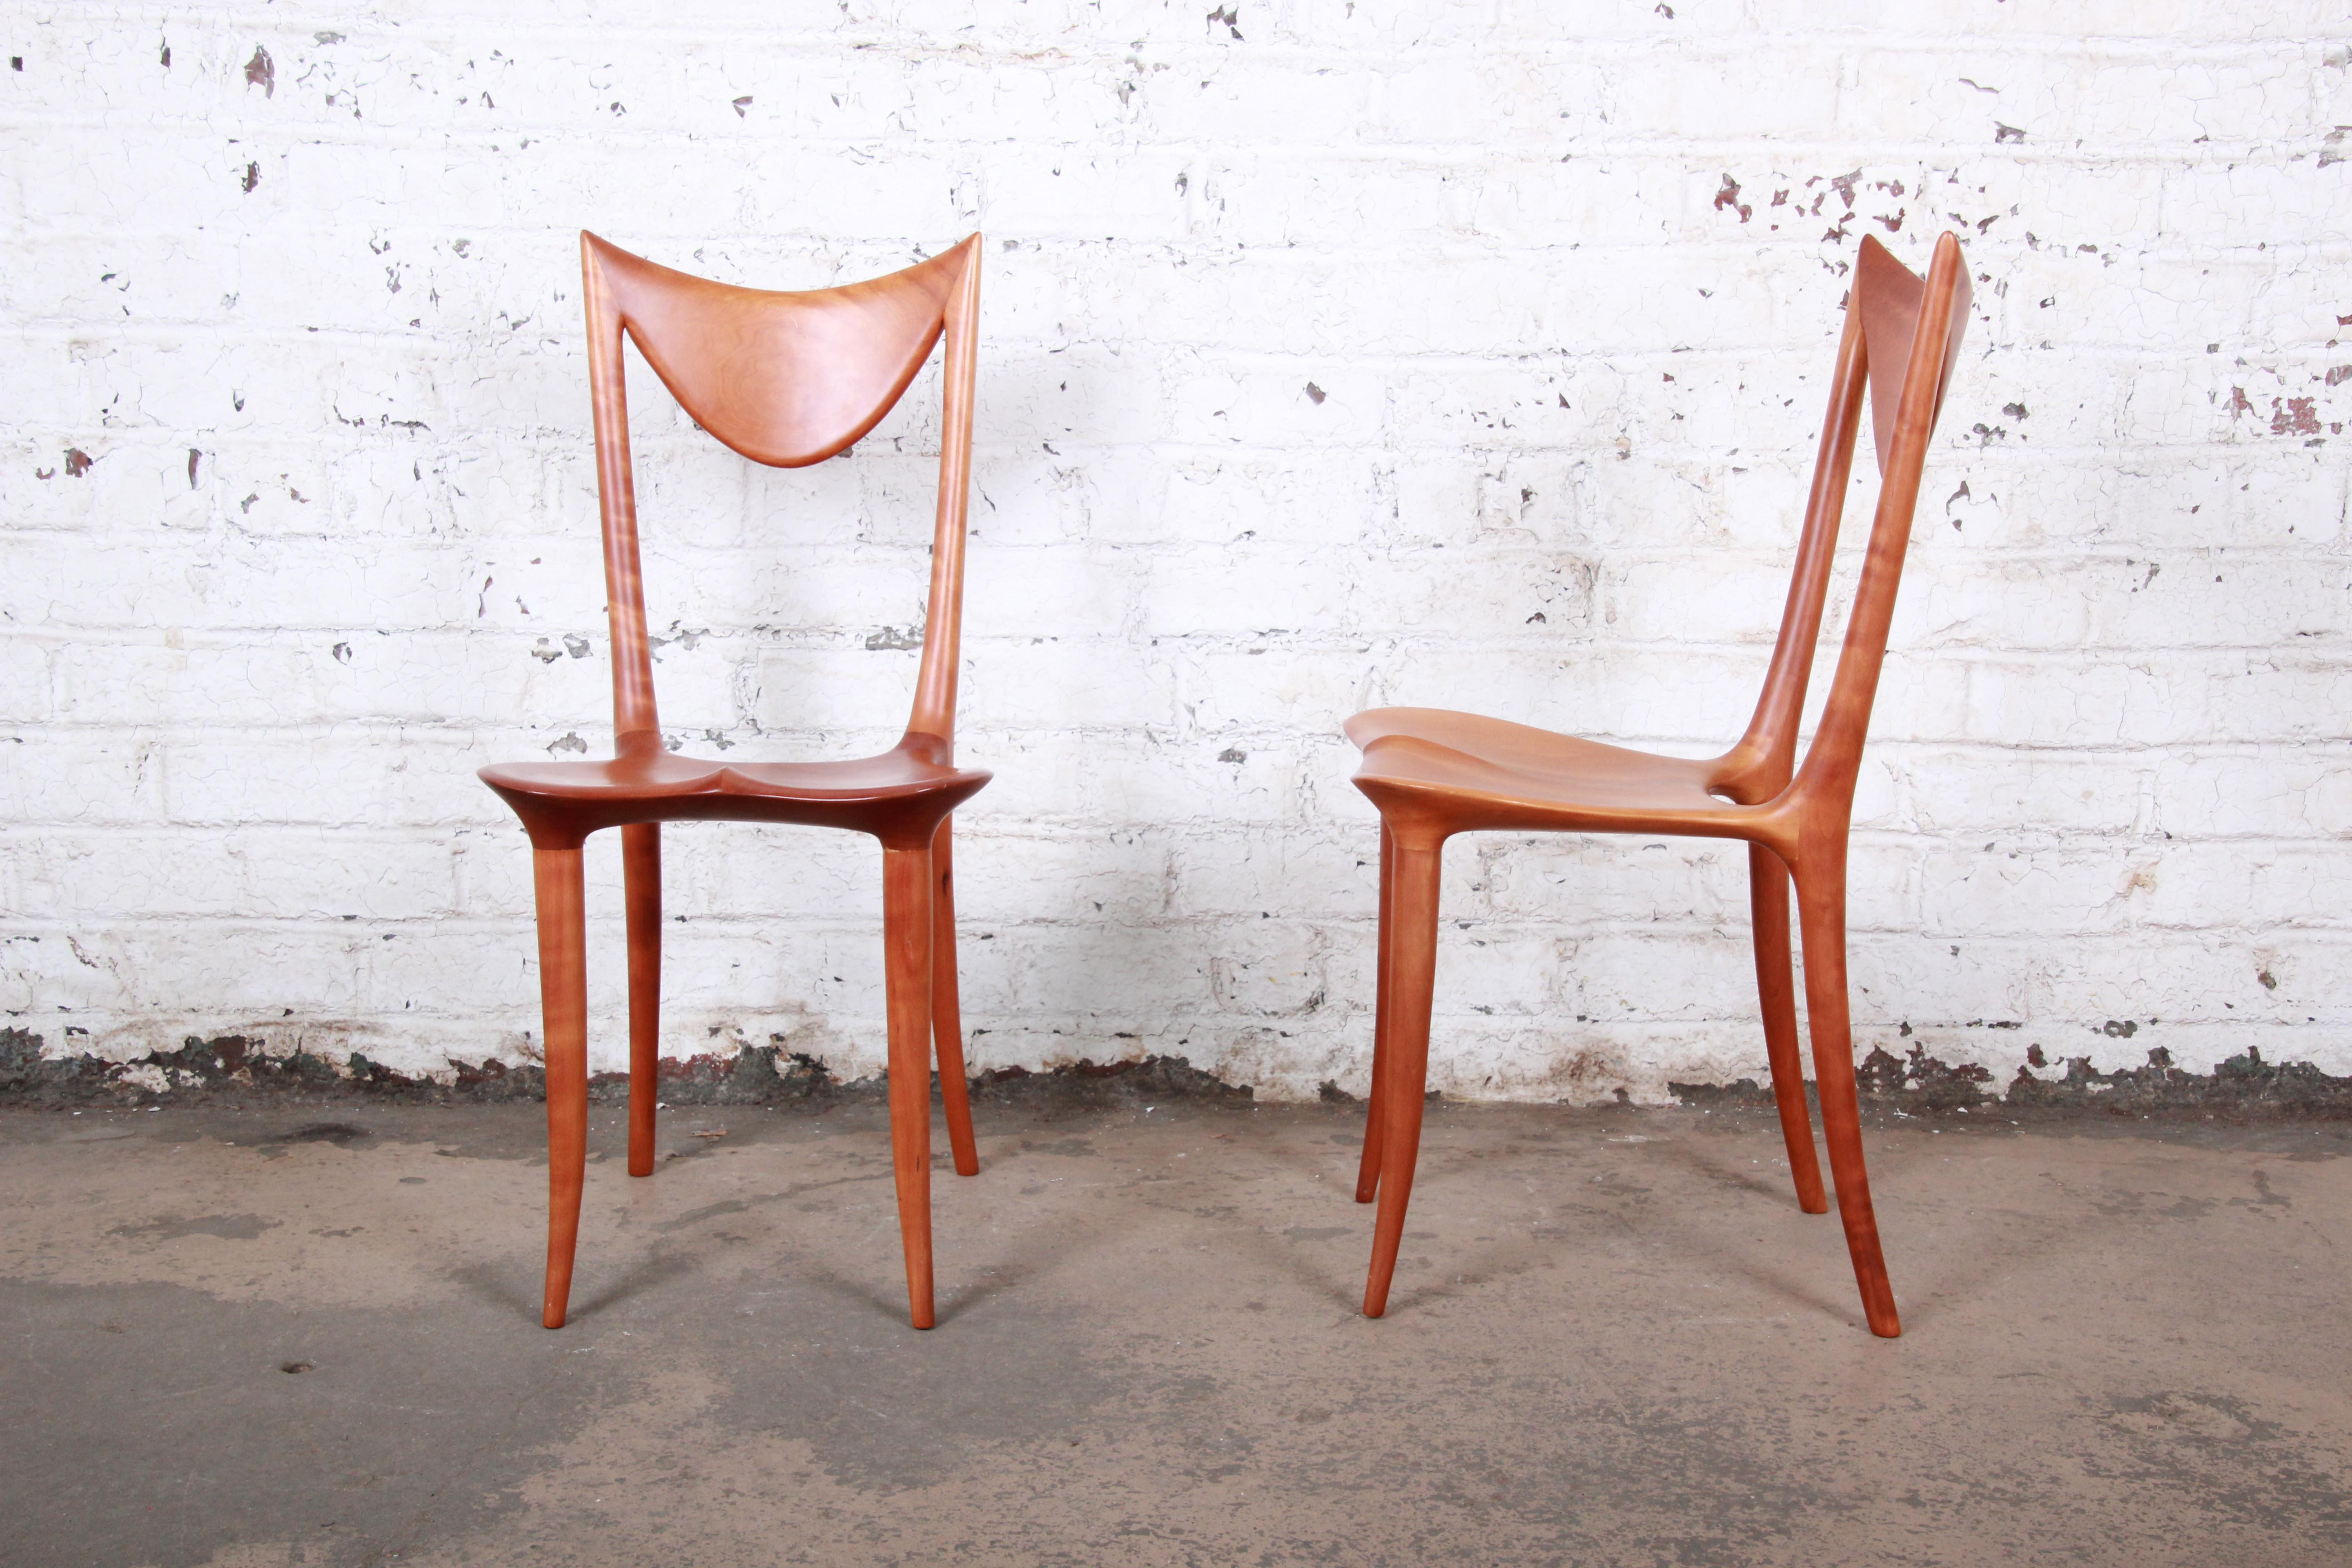 A rare and exceptional pair of studio craftsman sculpted chairs by world-famous Slovenian Industrial designer and artist Oskar Kogoj. These sculpted solid cherrywood chairs, known as 